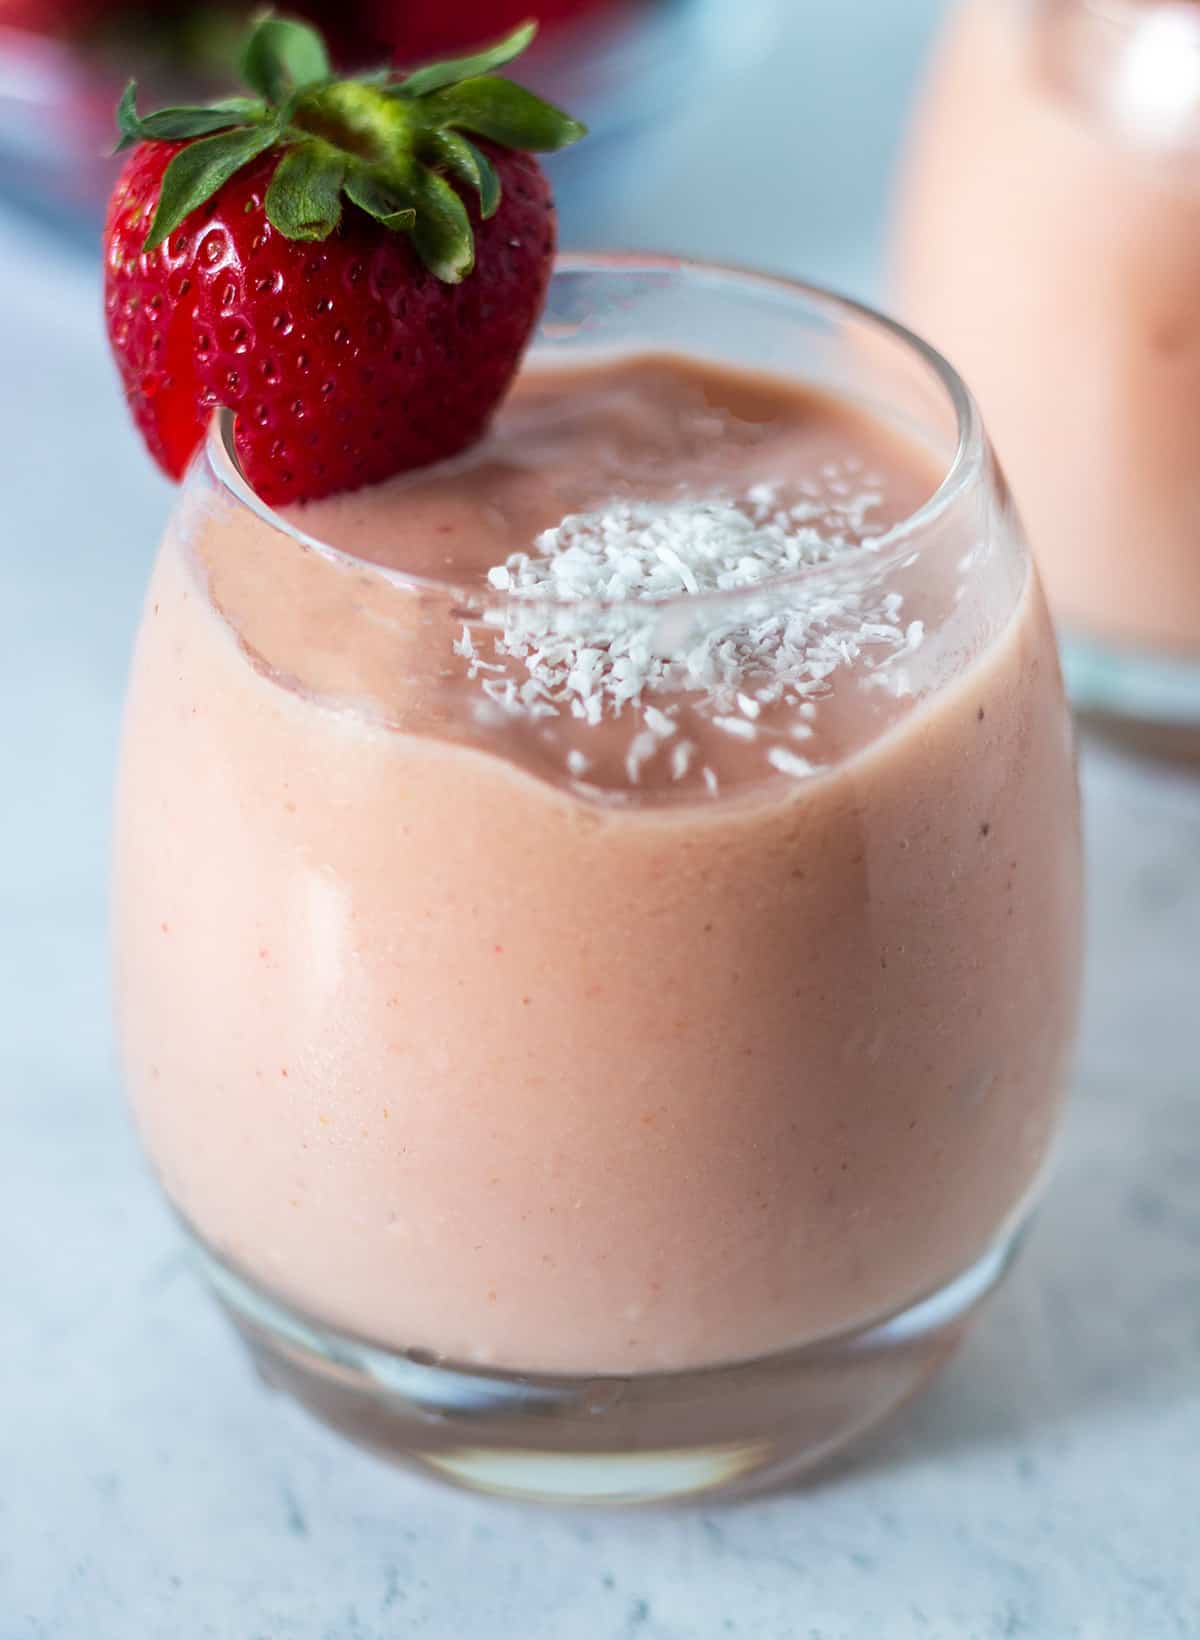 tropical smoothie in a clear glass garnished with shredded coconut and a fresh strawberry on the side of the glass.